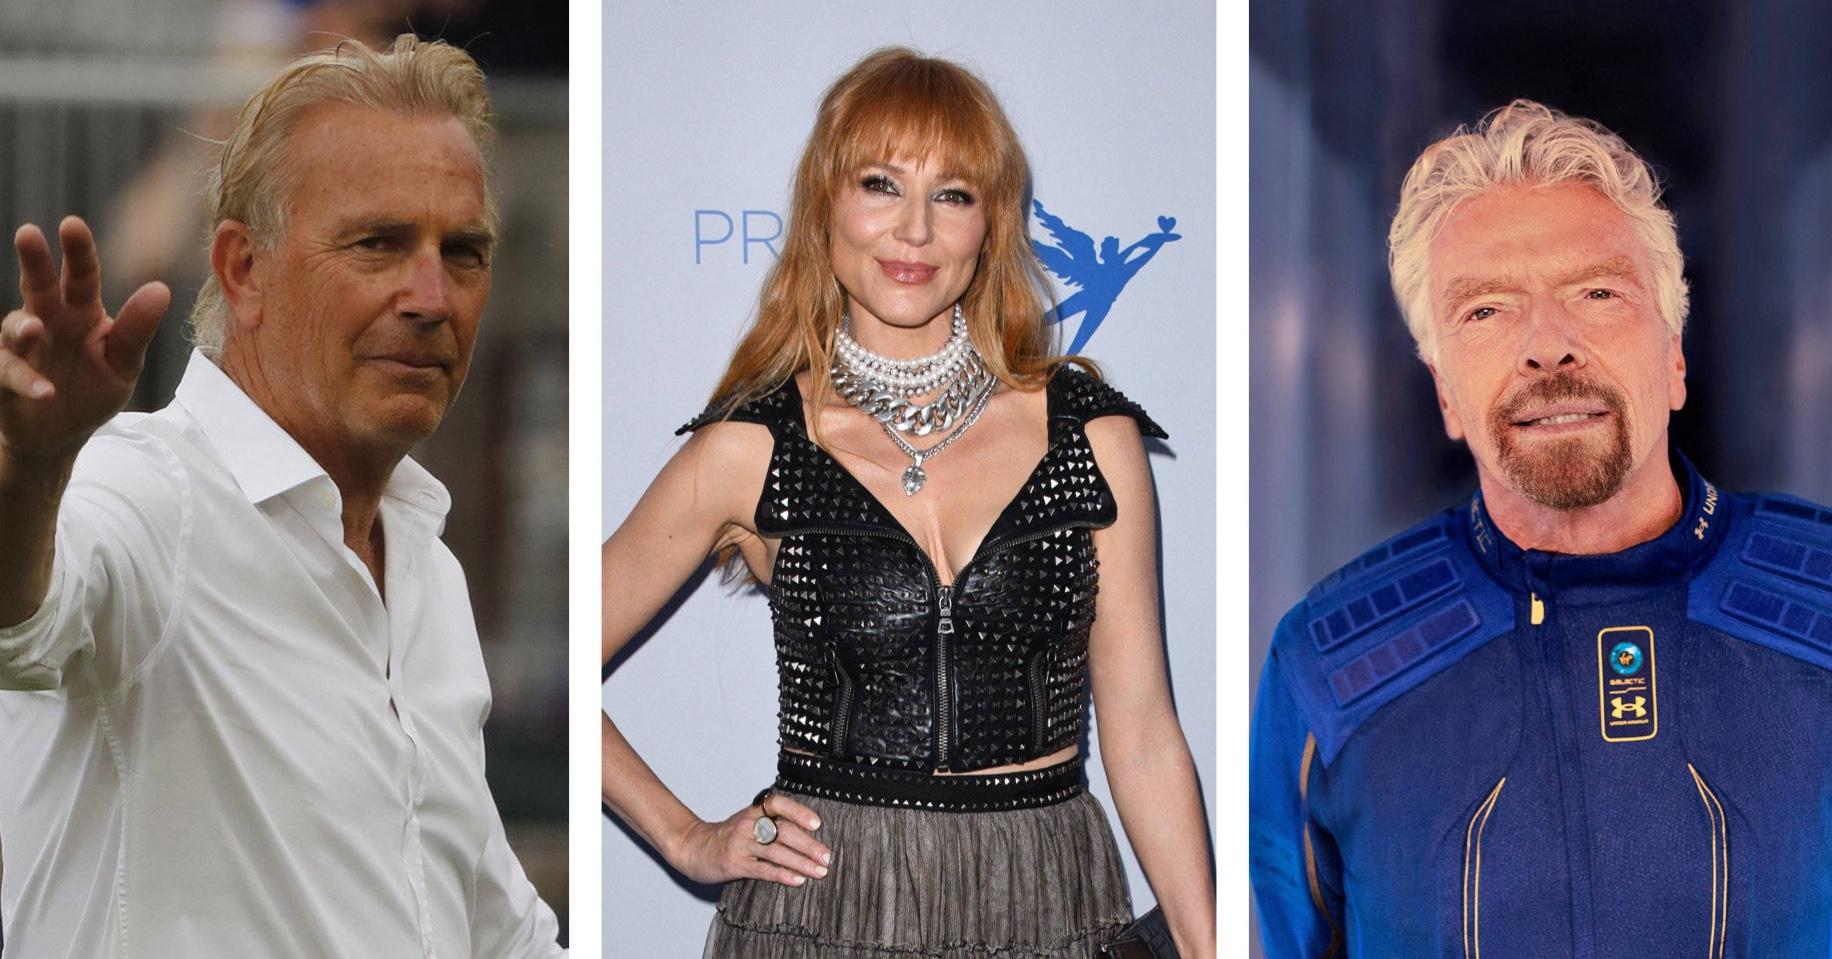 Kevin Costner's new lady love Jewel: Singer, 49, looks better than